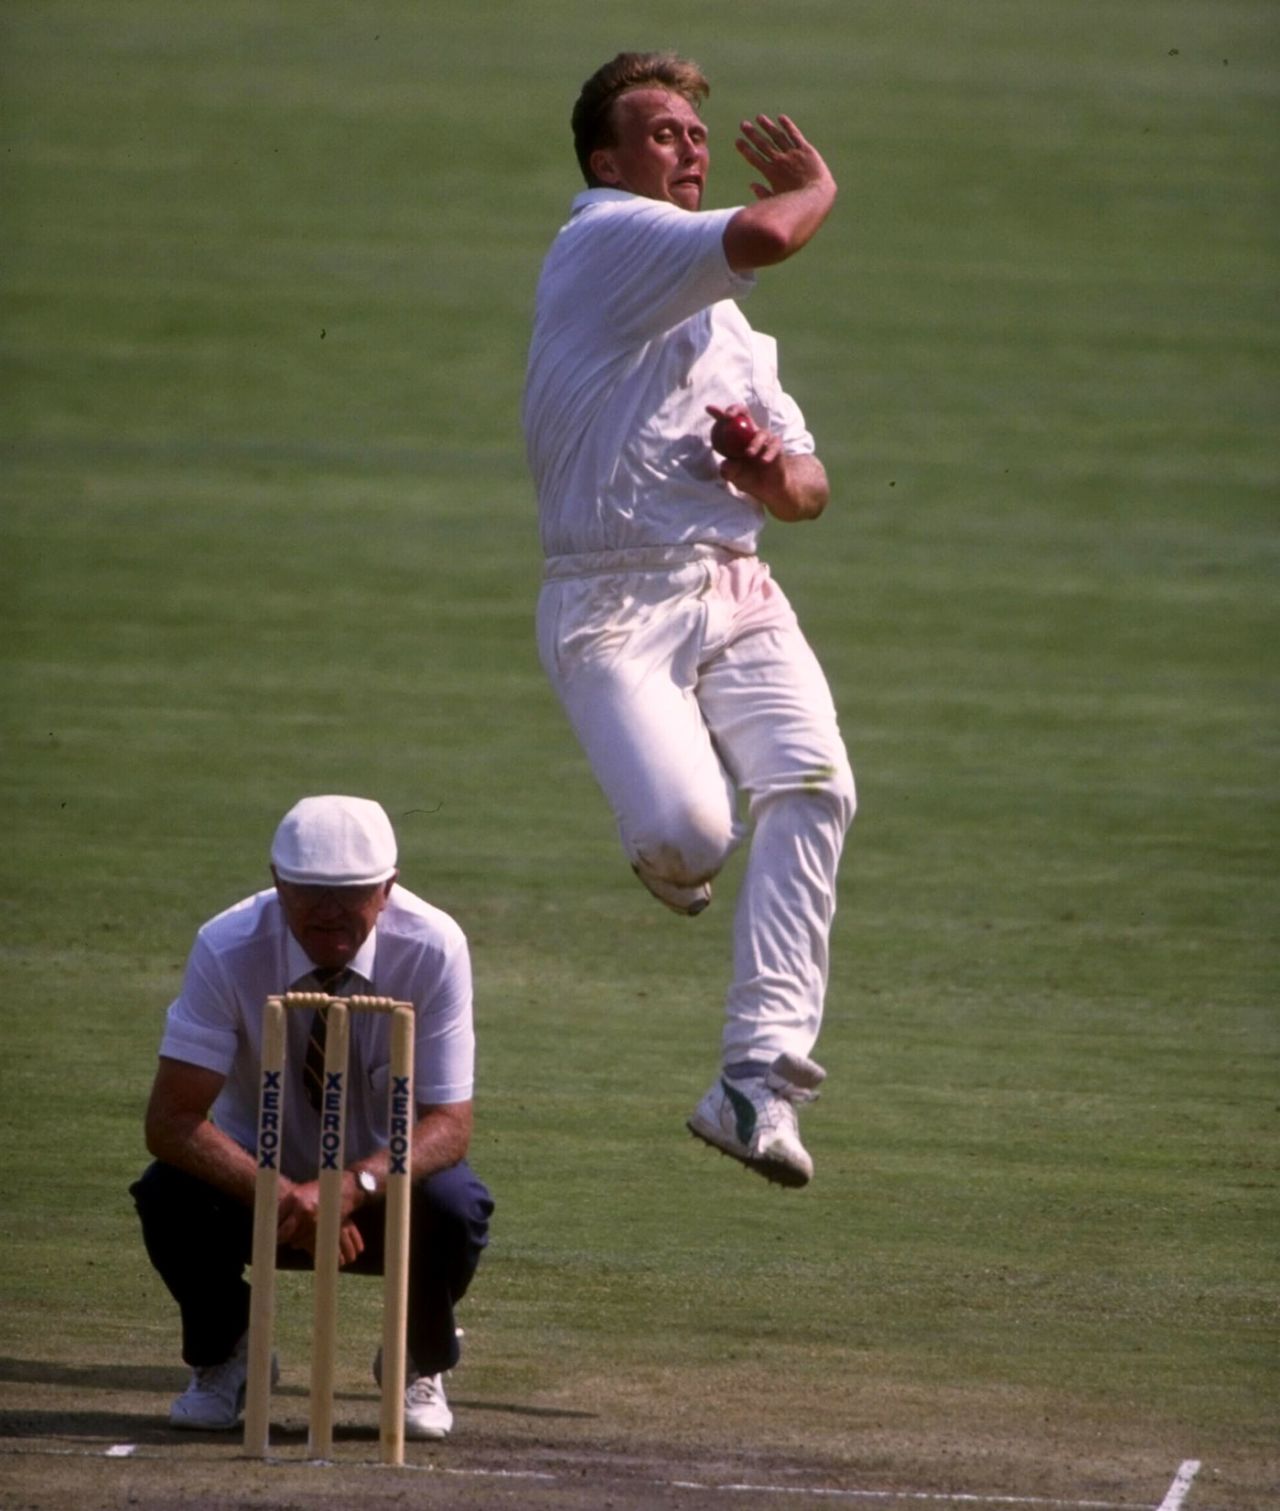 Fast bowler Brett Schultz bowls, watched by umpire Cyril Mitchley, South Africa Board President's XI v Indians, Centurion Park, November 7, 1992